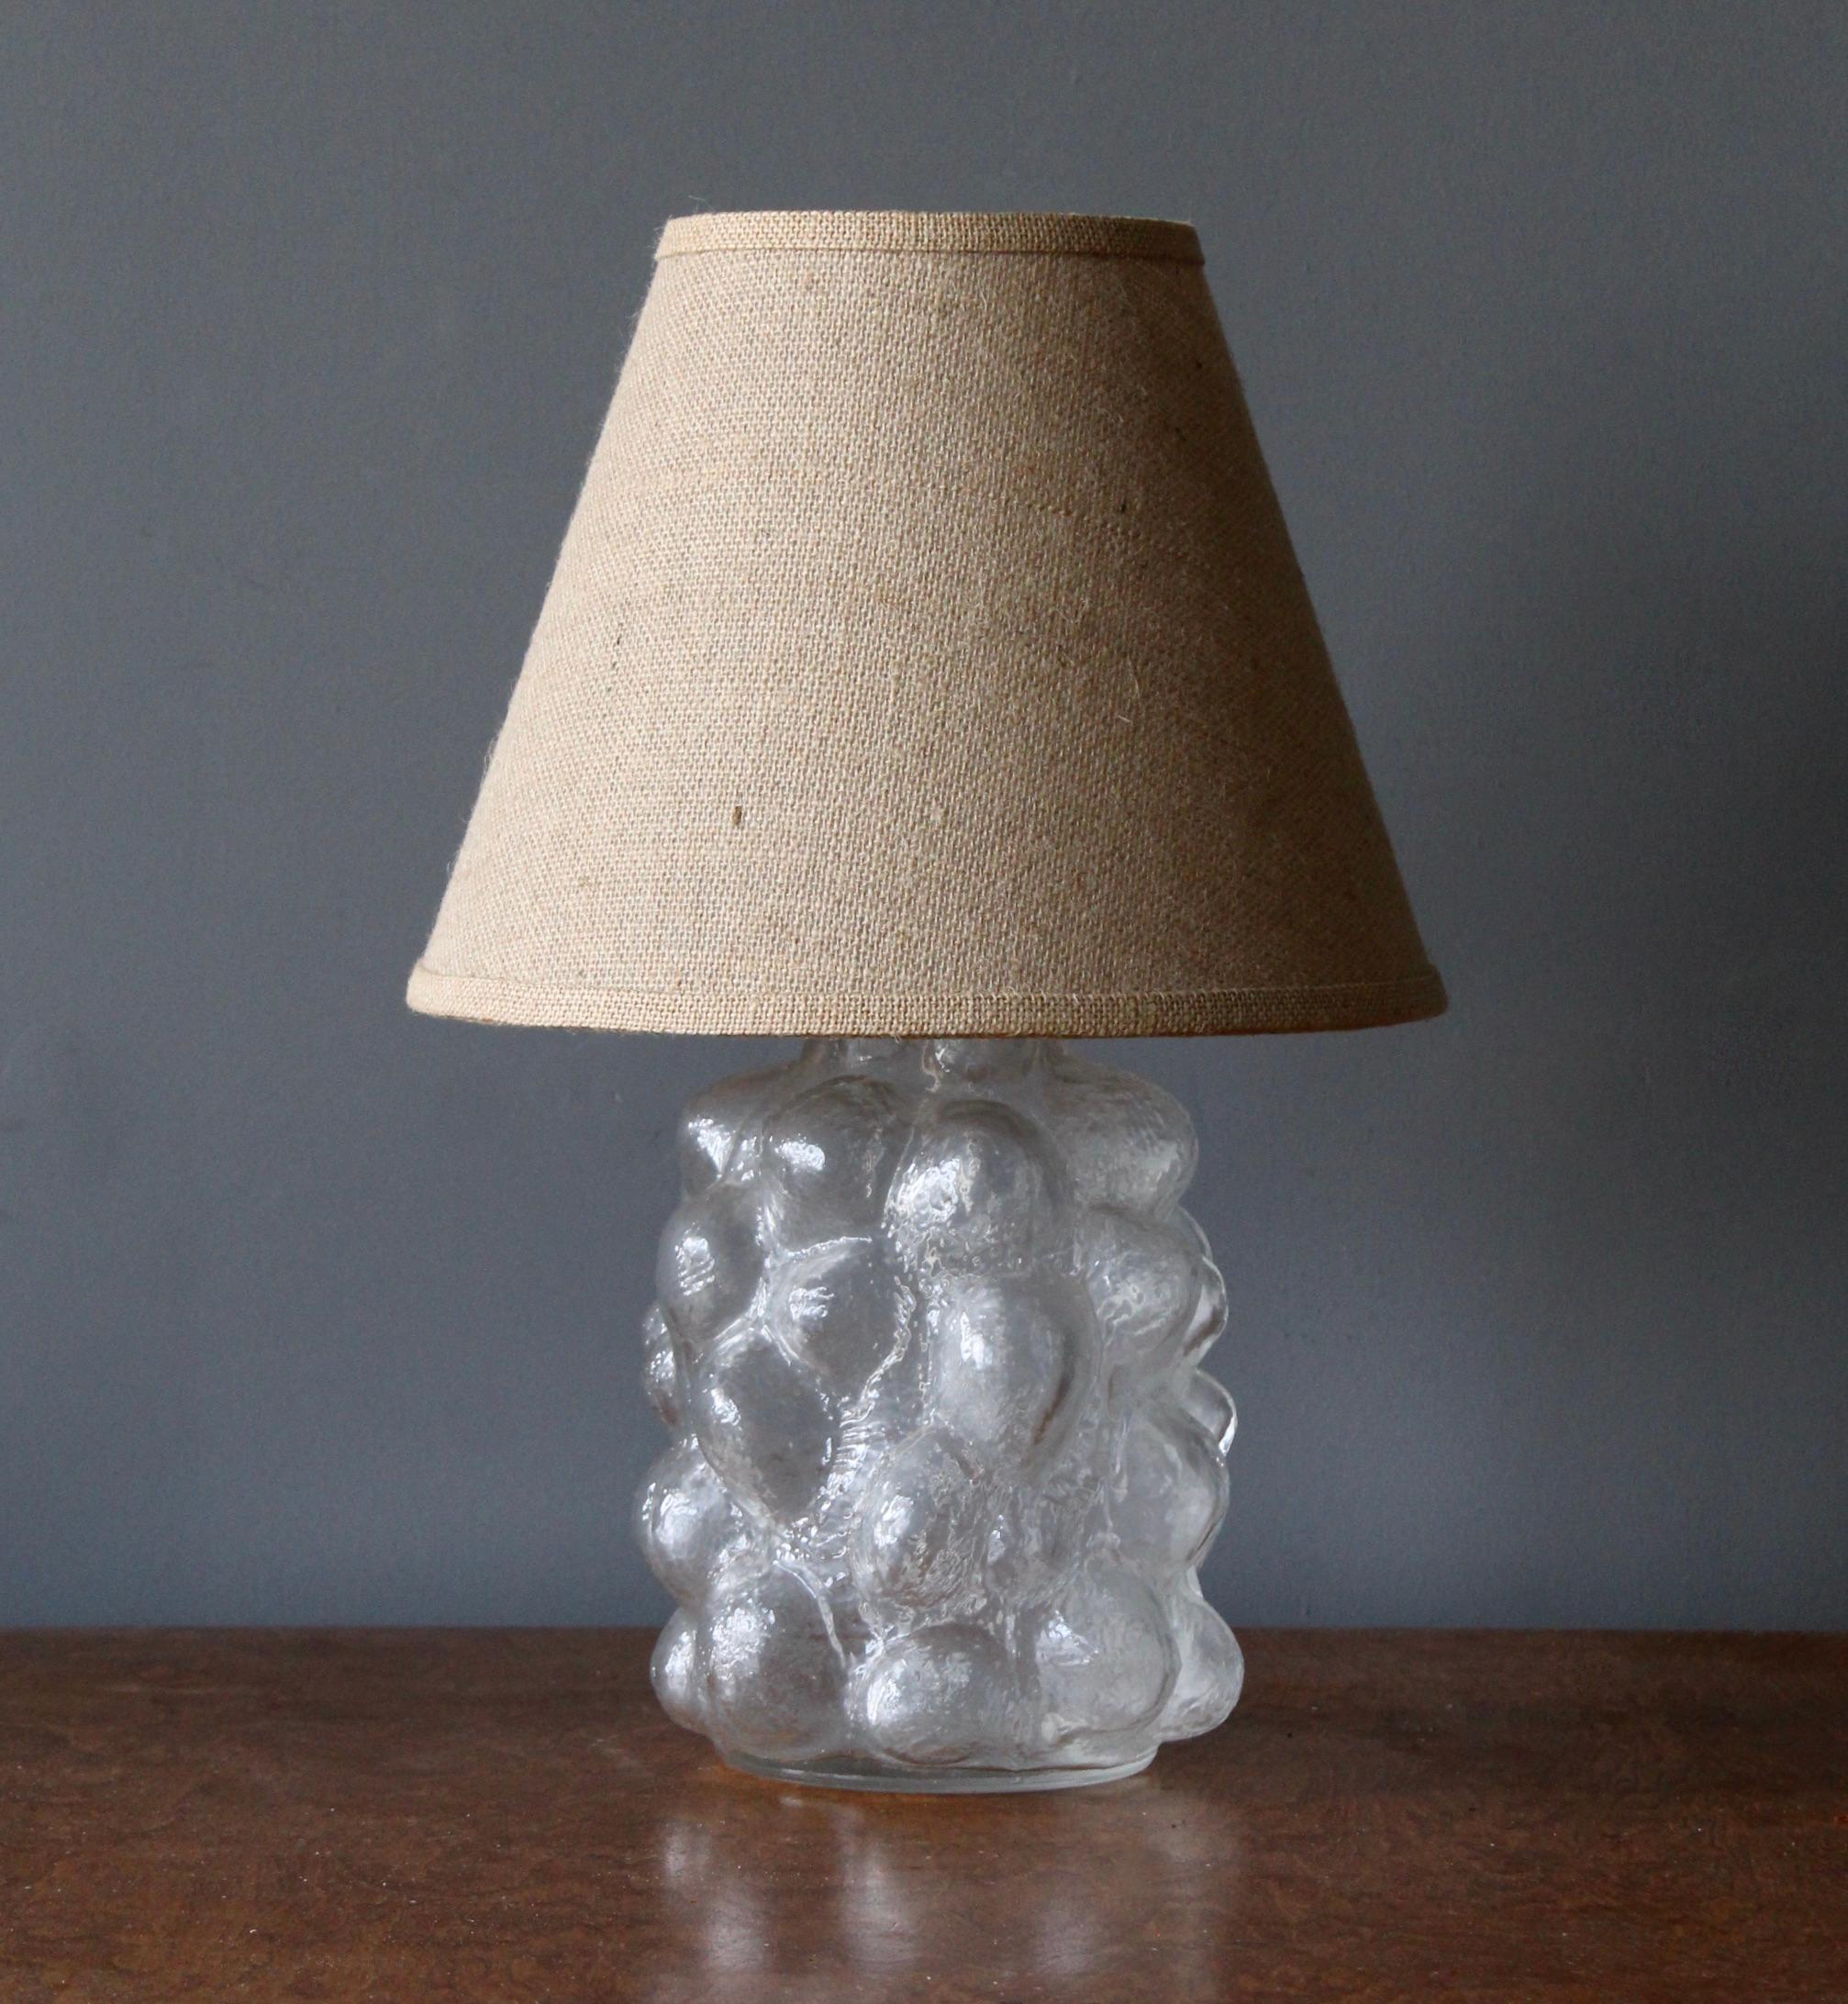 A table lamp in sculptured glass, By a Swedish unknown designer and maker, 1950s-1960s.

Stated dimensions excluding lampshade. Height includes socket. Sold without lampshade.